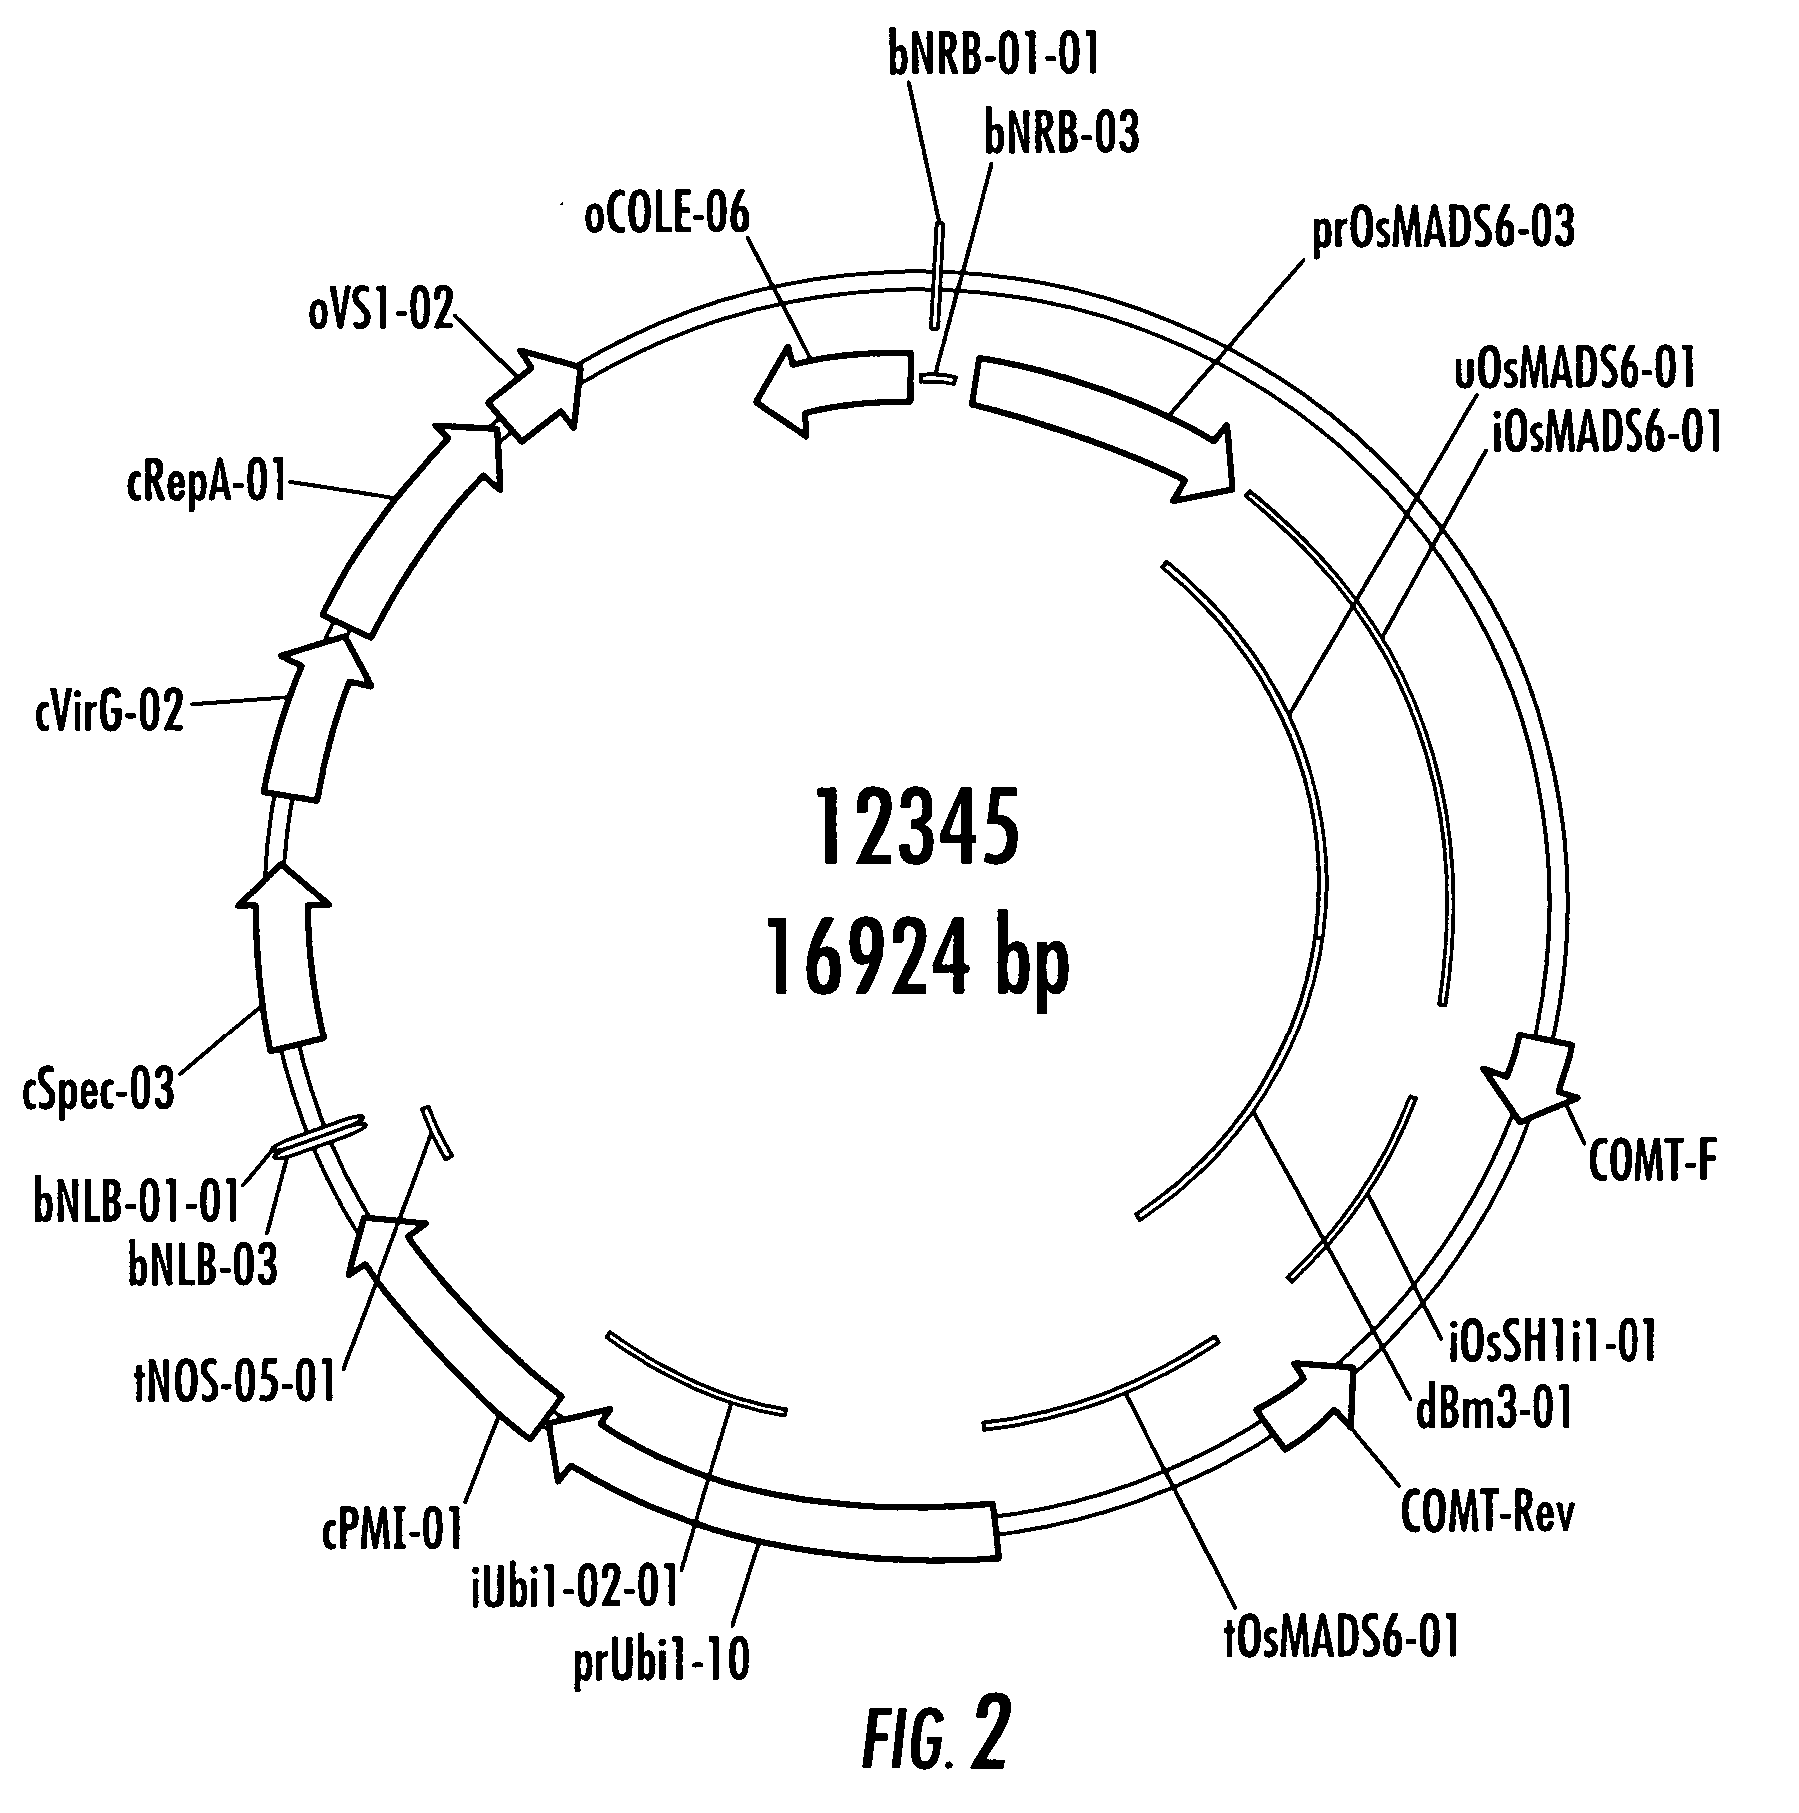 Methods and genetic constructs for modification of lignin composition of corn cobs